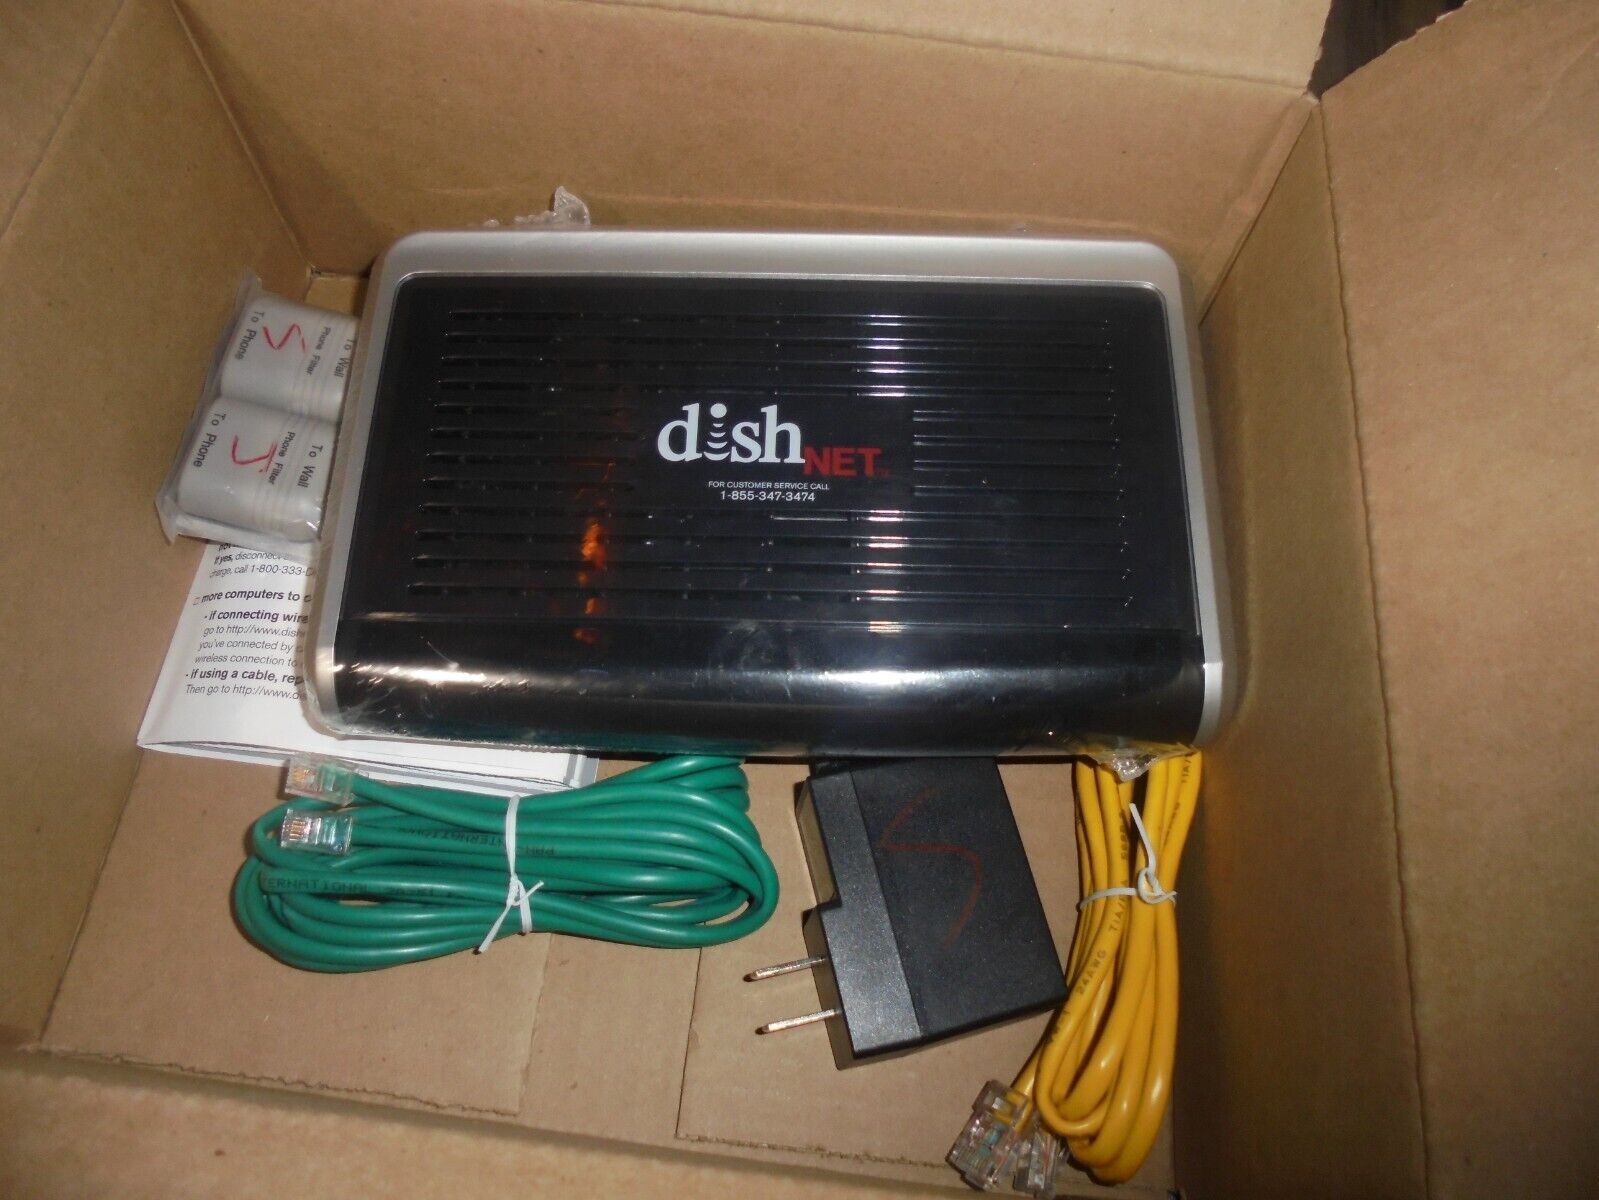 NEW IN BOX~Sealed Dishnet/Centurylink C1000A DSL WiFi MODEM ROUTER COMBO